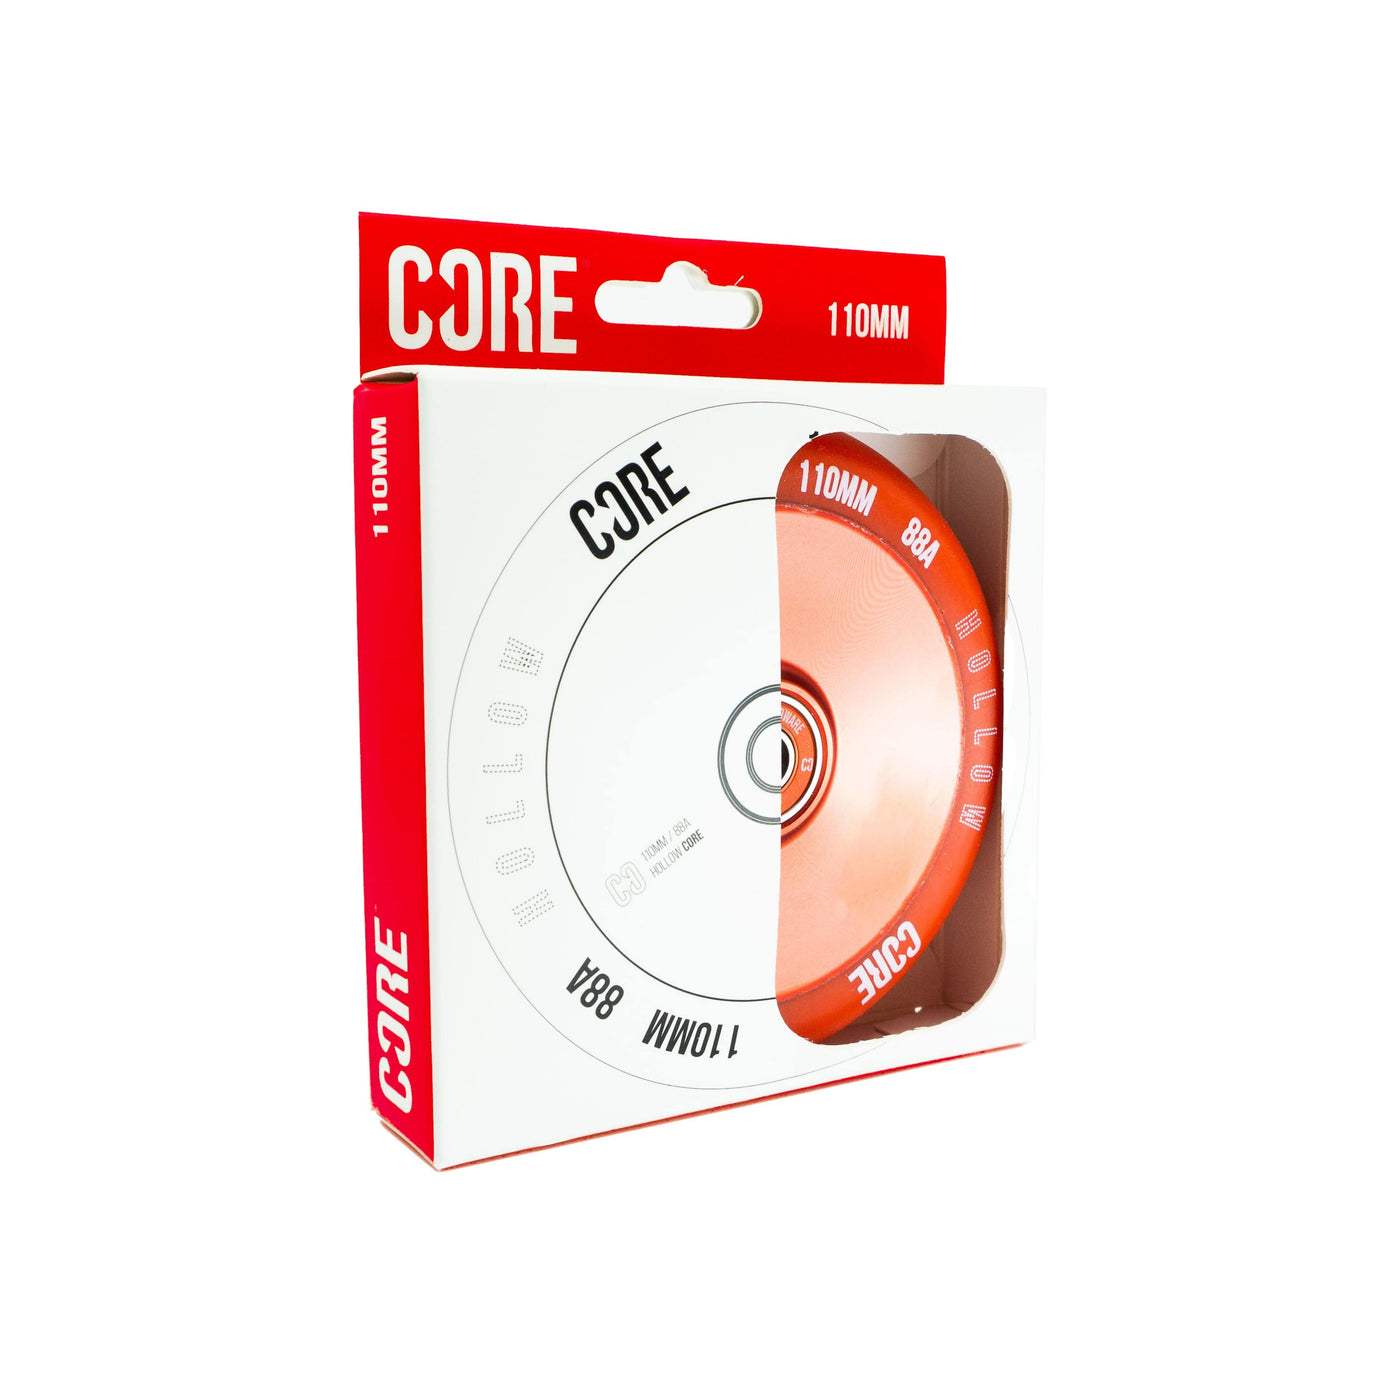 CORE Hollow V2 Red Scooter Wheel 110mm I Stunt Scooter Wheel Packaging